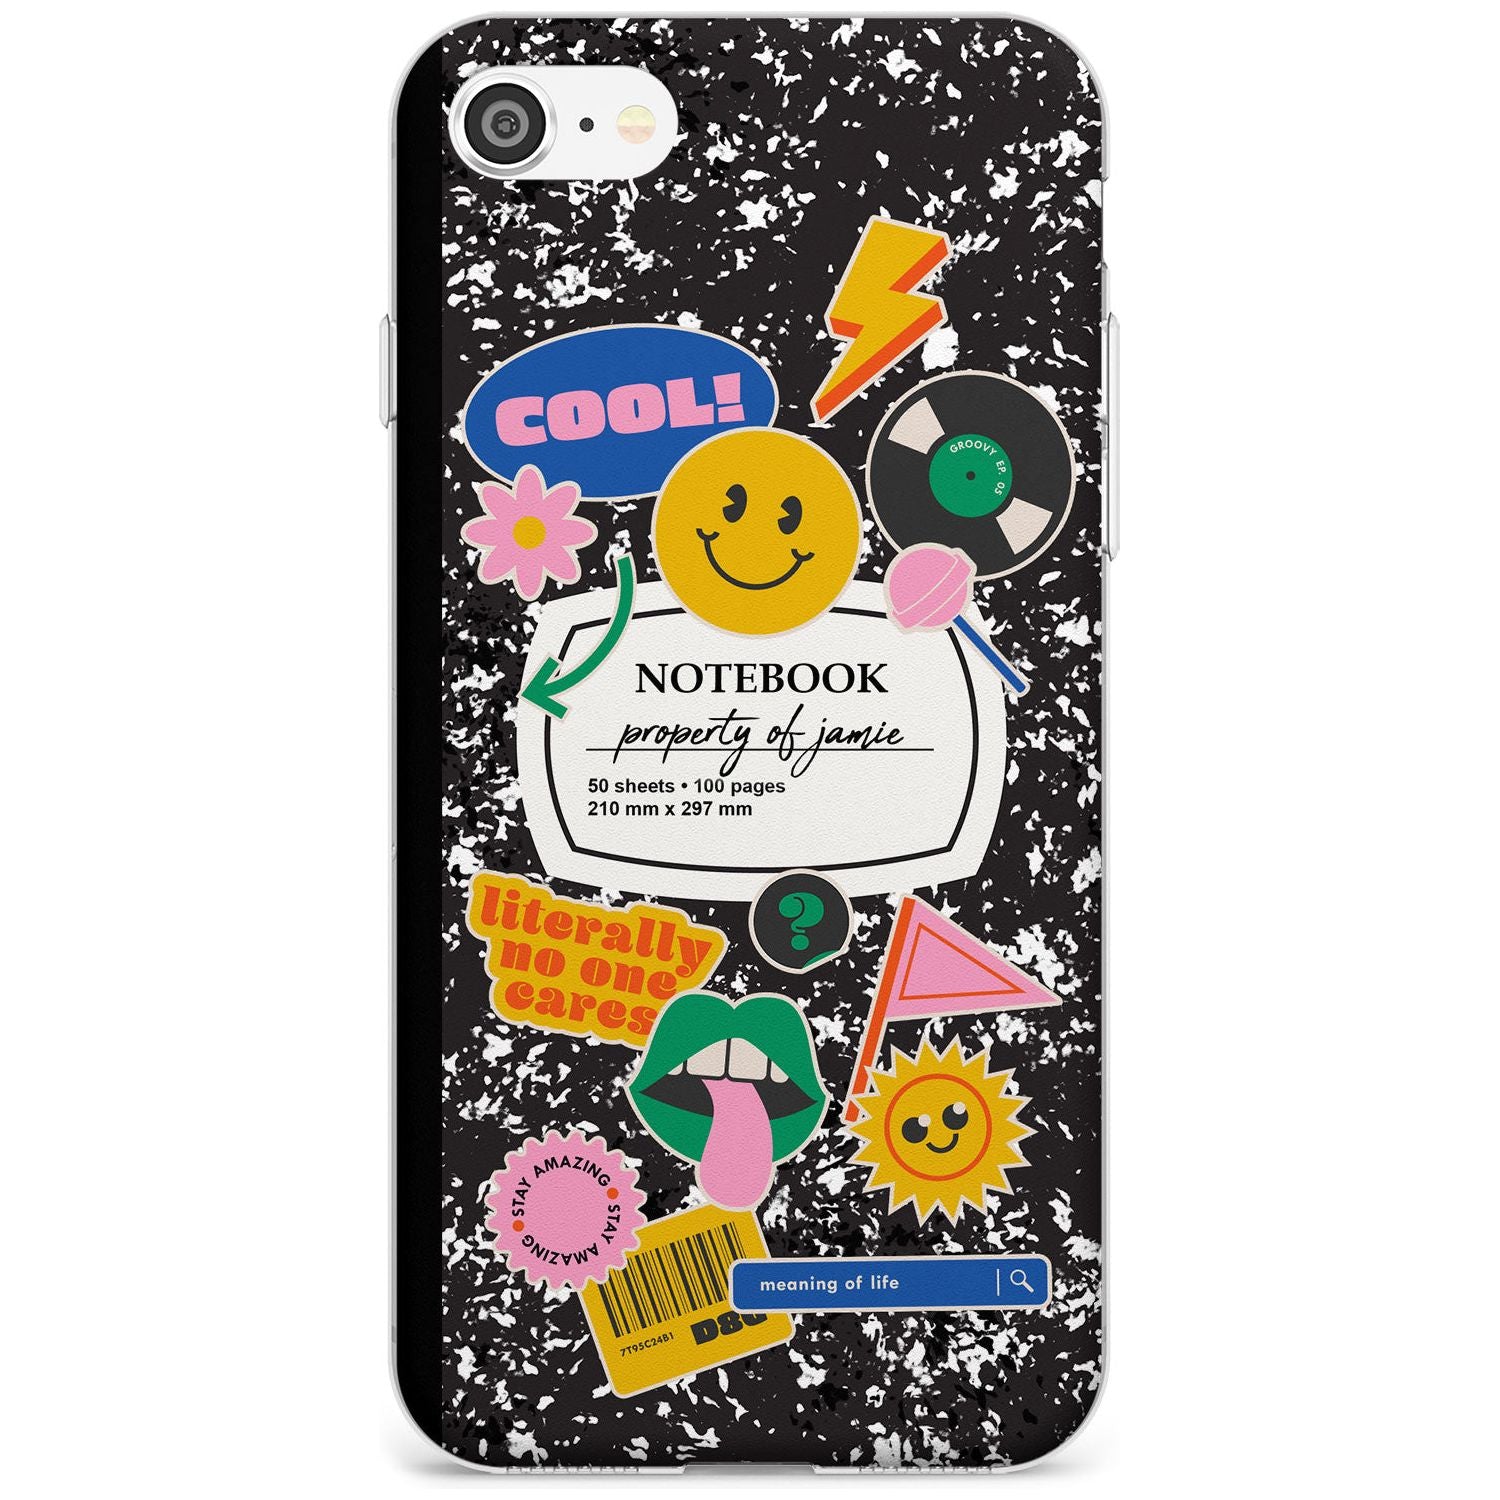 Custom Notebook Cover with Stickers Black Impact Phone Case for iPhone SE 8 7 Plus